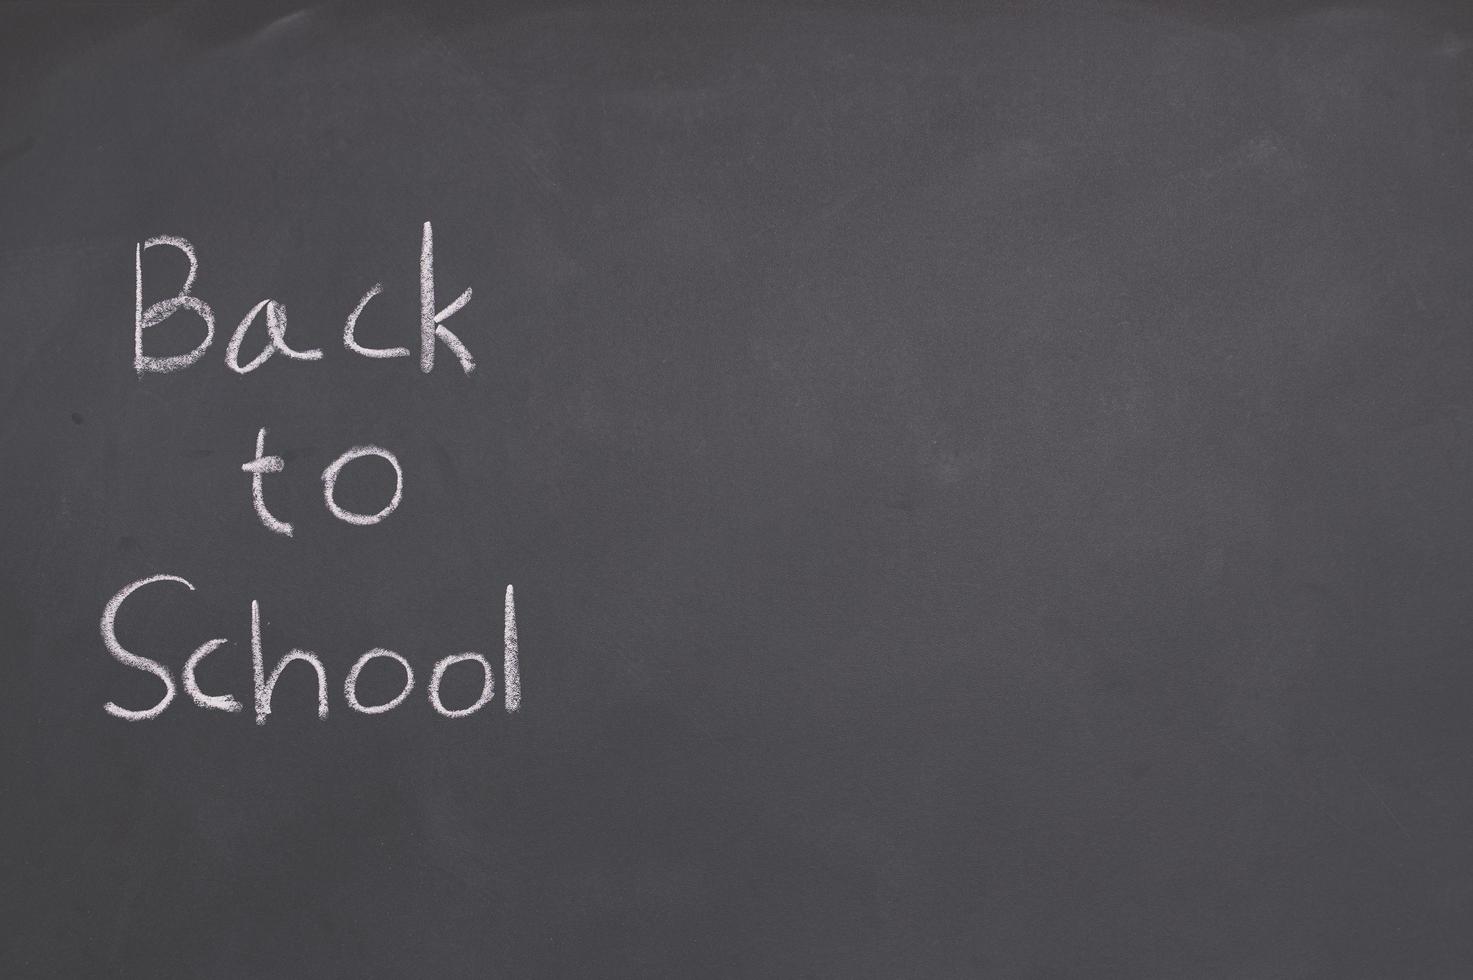 Back to school and education concept on blackboard photo